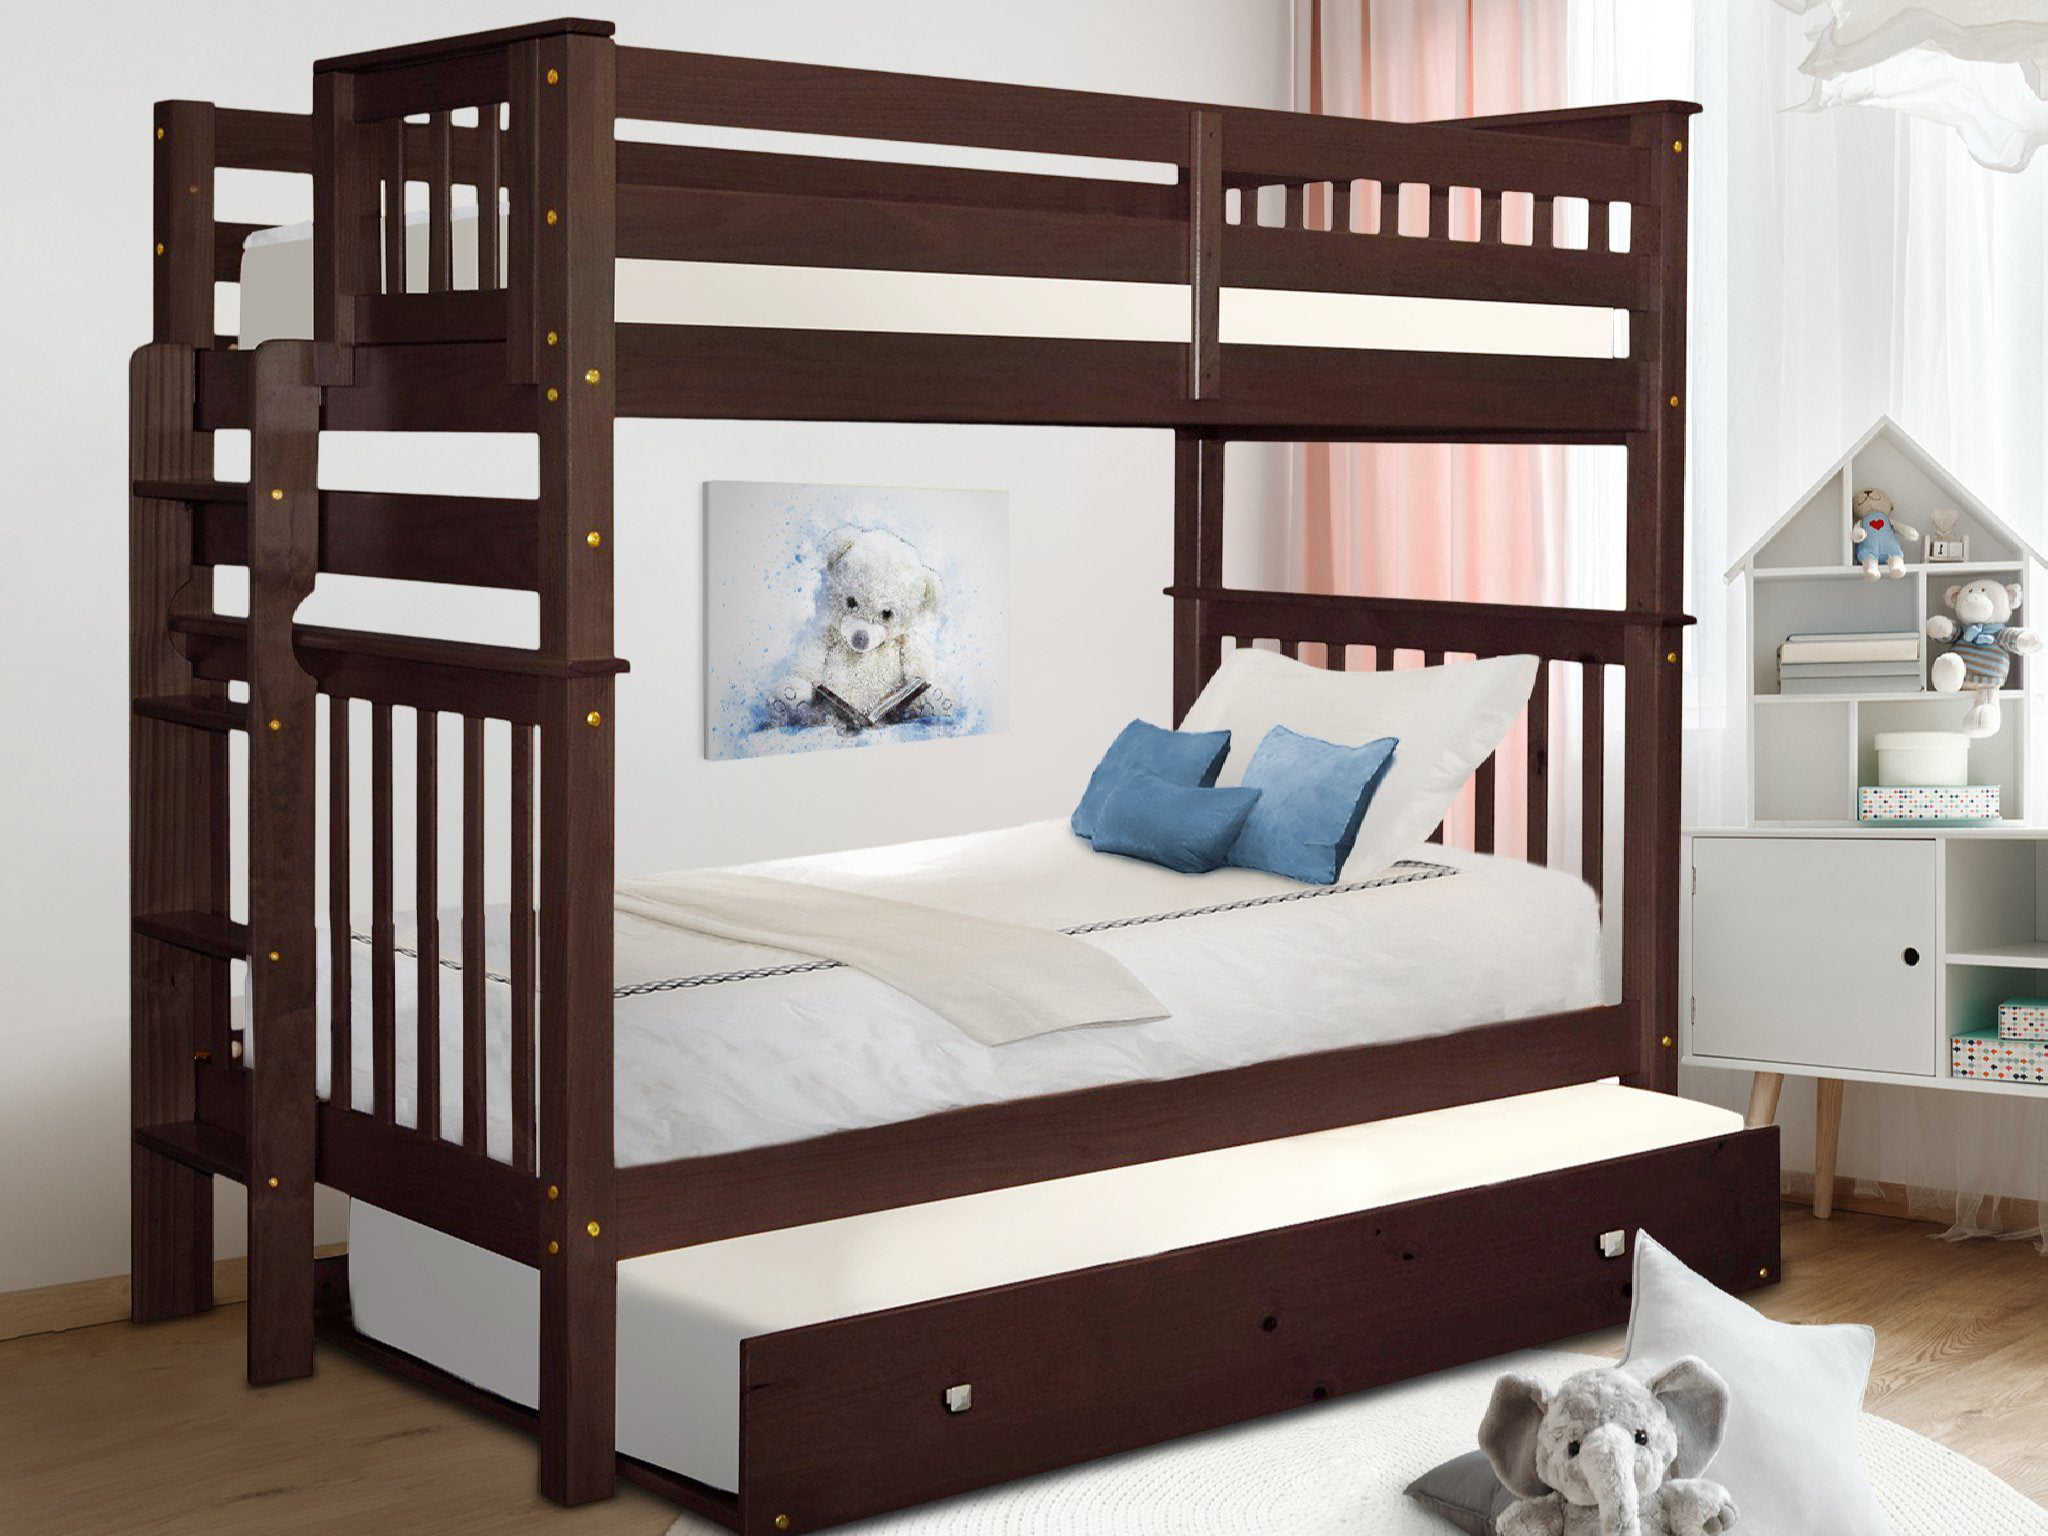 Bedz King Tall Bunk Beds Twin Over, Bunk Bed Tall